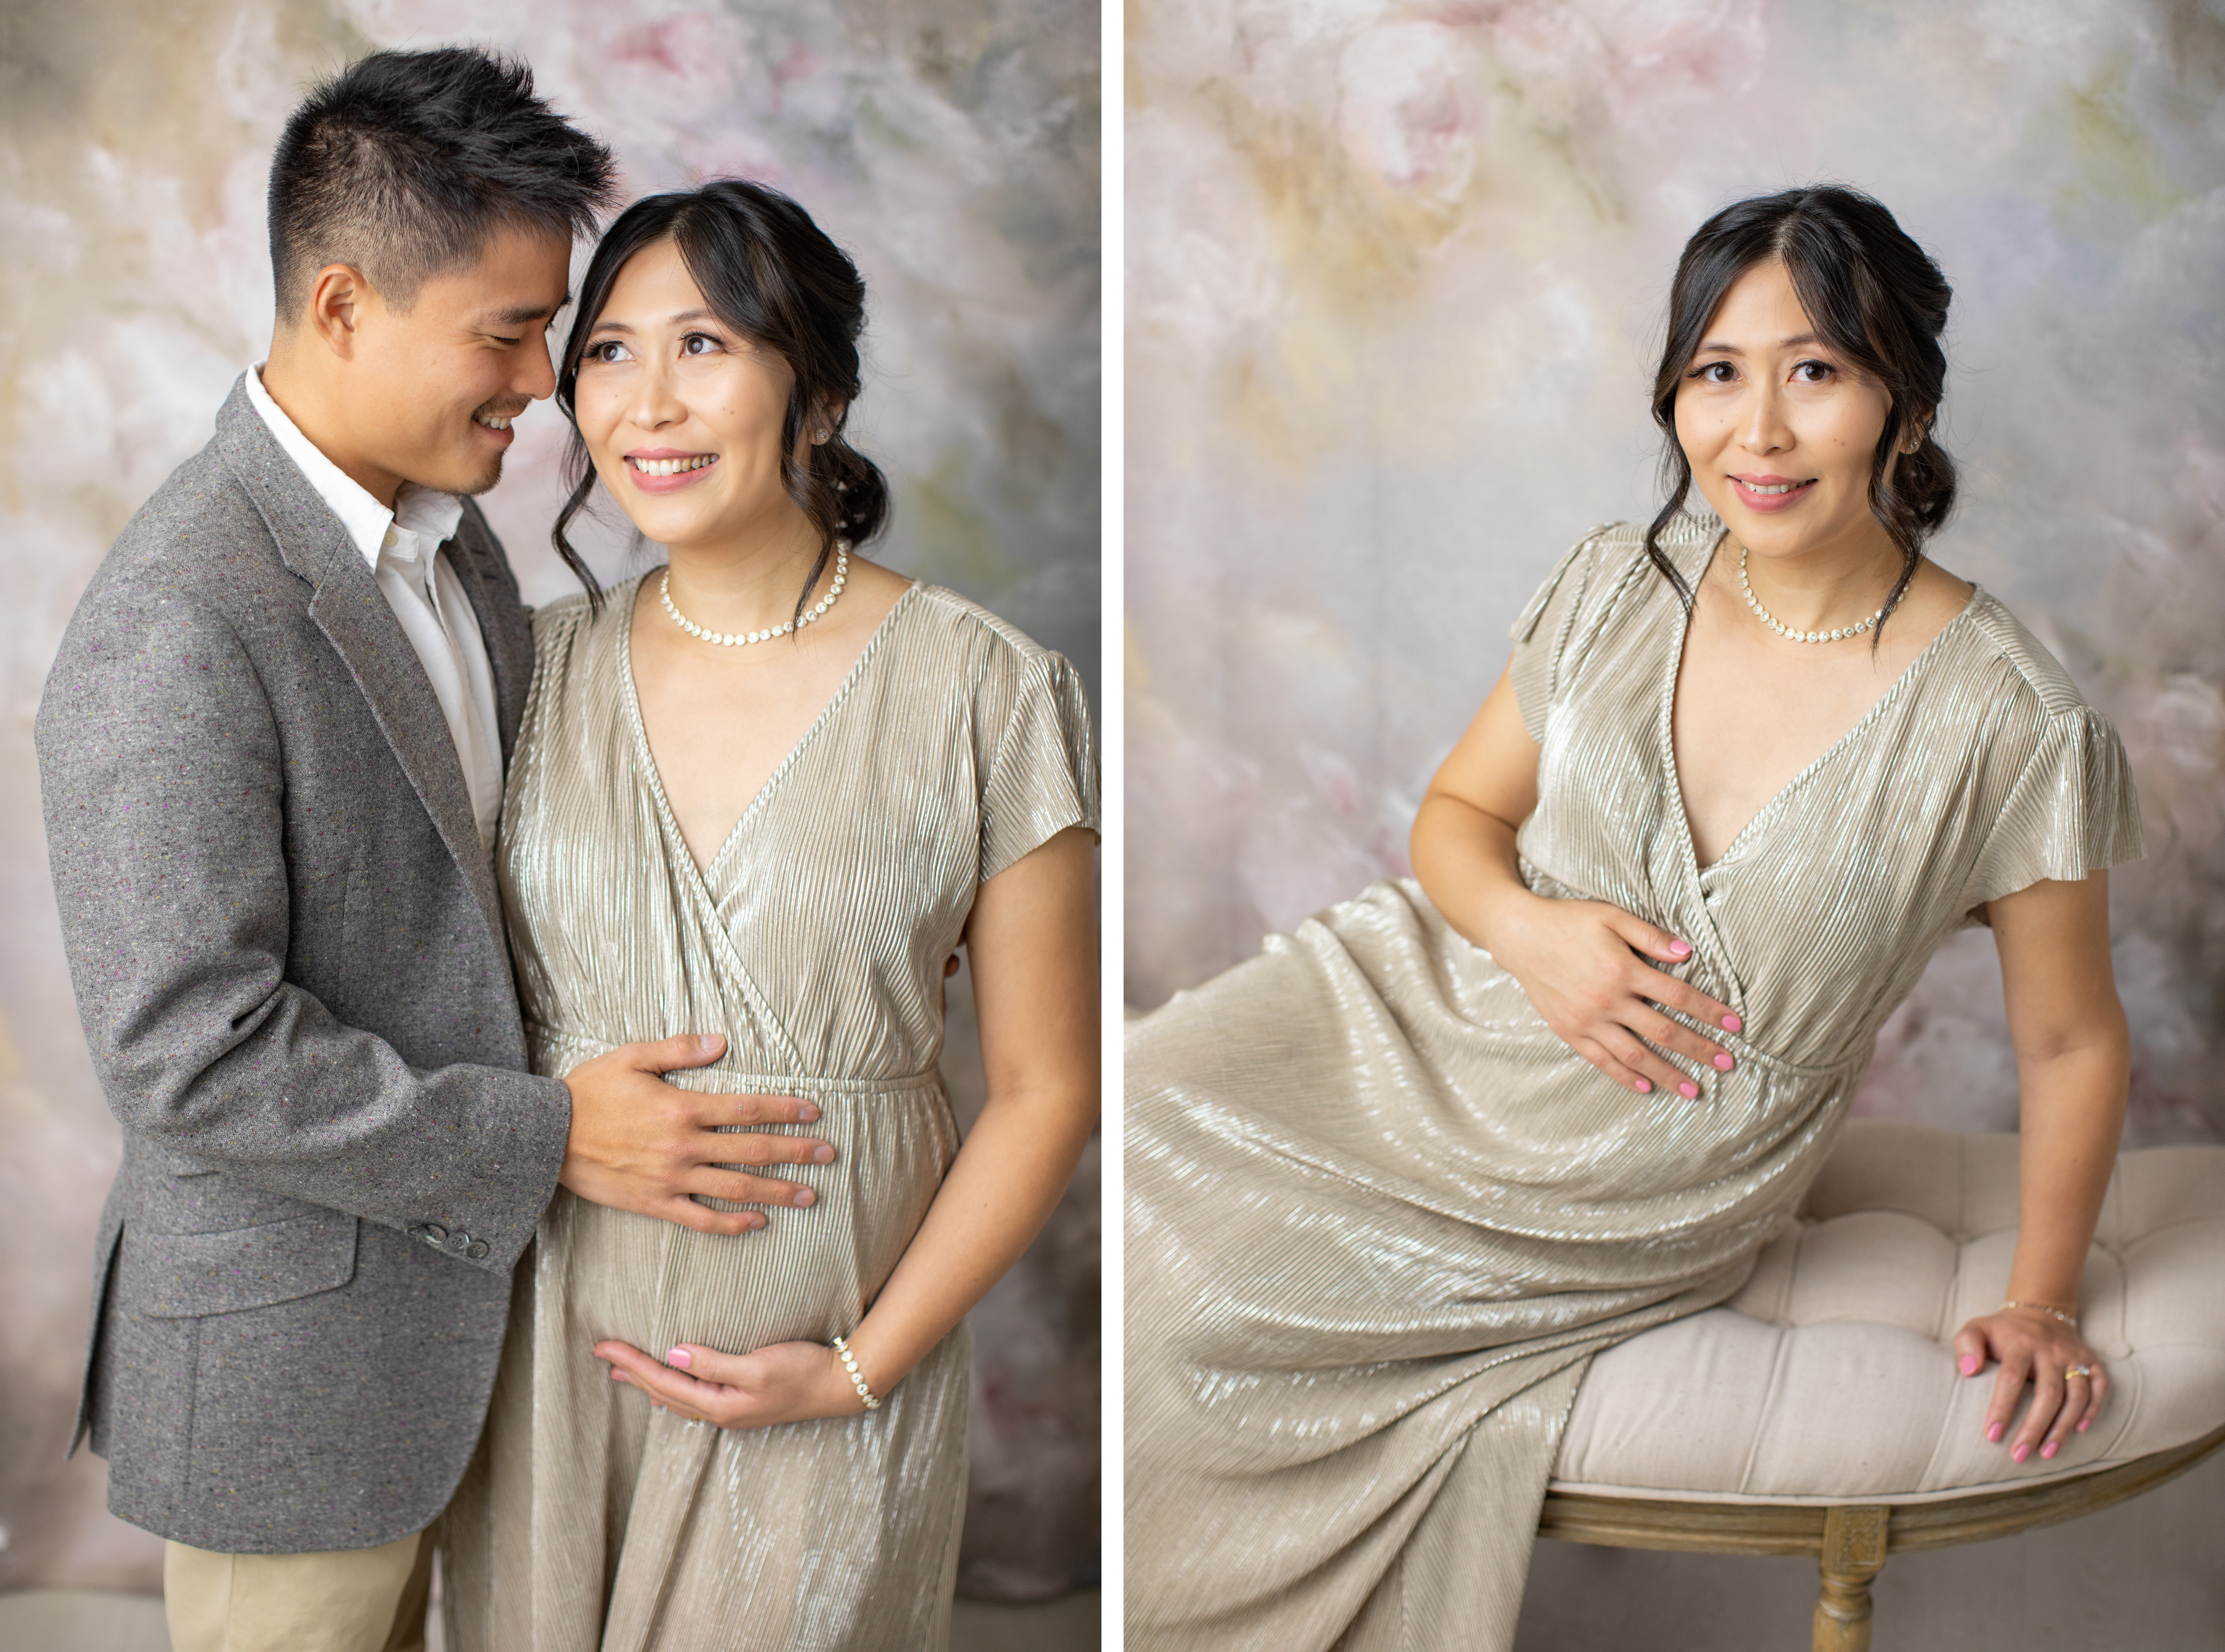 Gold maternity gown fromBaltic Born on floral background